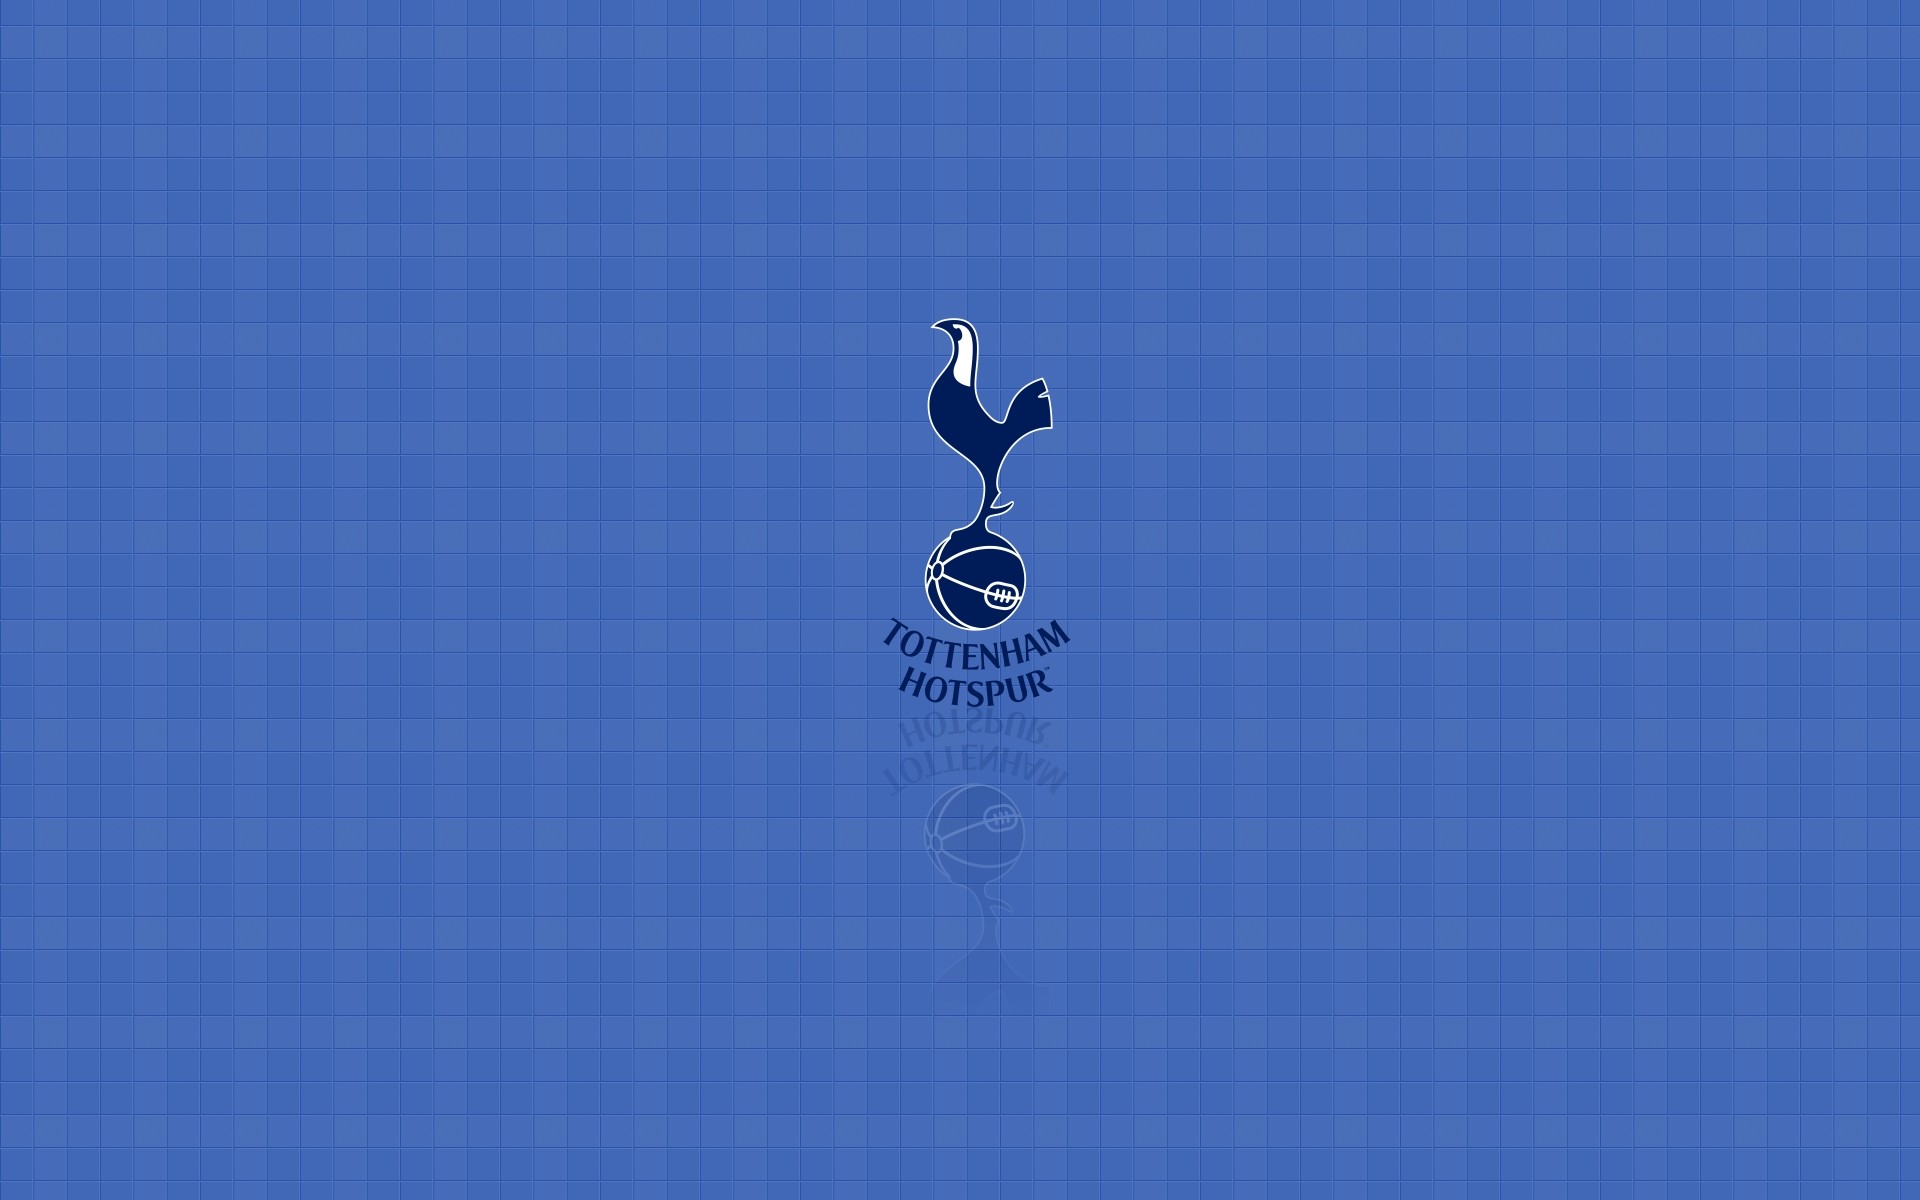 1920x1200 Tottenham Hotspur wallpaper with crest, widescreen background with logo  px